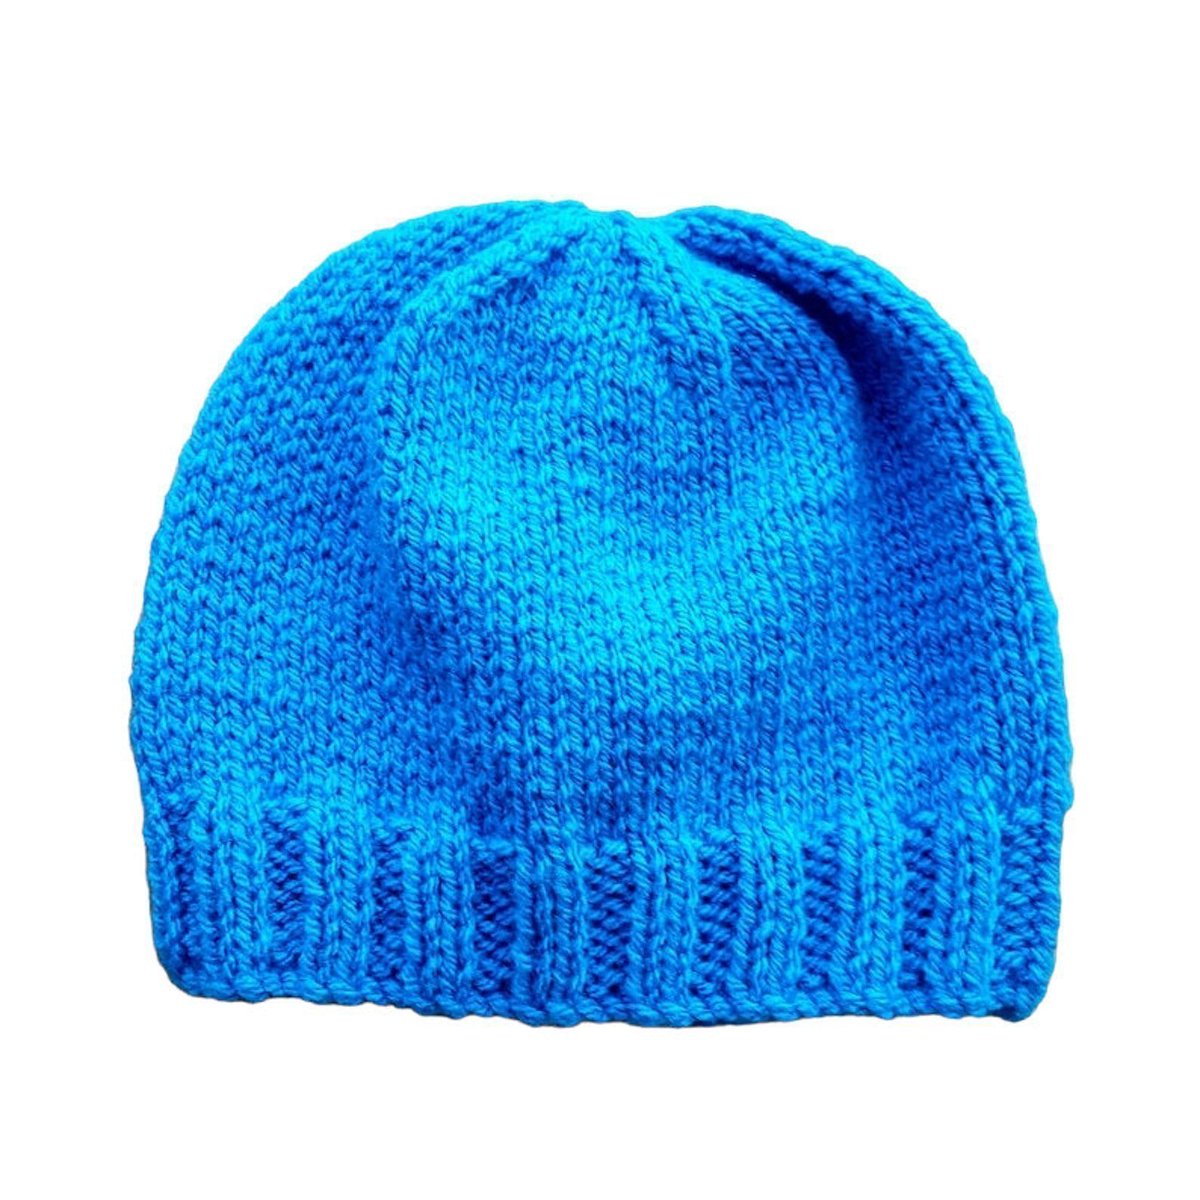 #MHHSBD 

𝗕𝗹𝘂𝗲 𝗕𝗮𝗯𝘆 𝗛𝗮𝘁 𝟬-𝟯 𝗠𝗼𝗻𝘁𝗵𝘀 

Wrap your newborn in warmth with this hand-knitted Blue Baby Hat. Perfectly sized for 0-3 months, it's the must-have winter knitwear. Stay trendy, stay warm! 

knittingtopia.etsy.com/listing/169899…